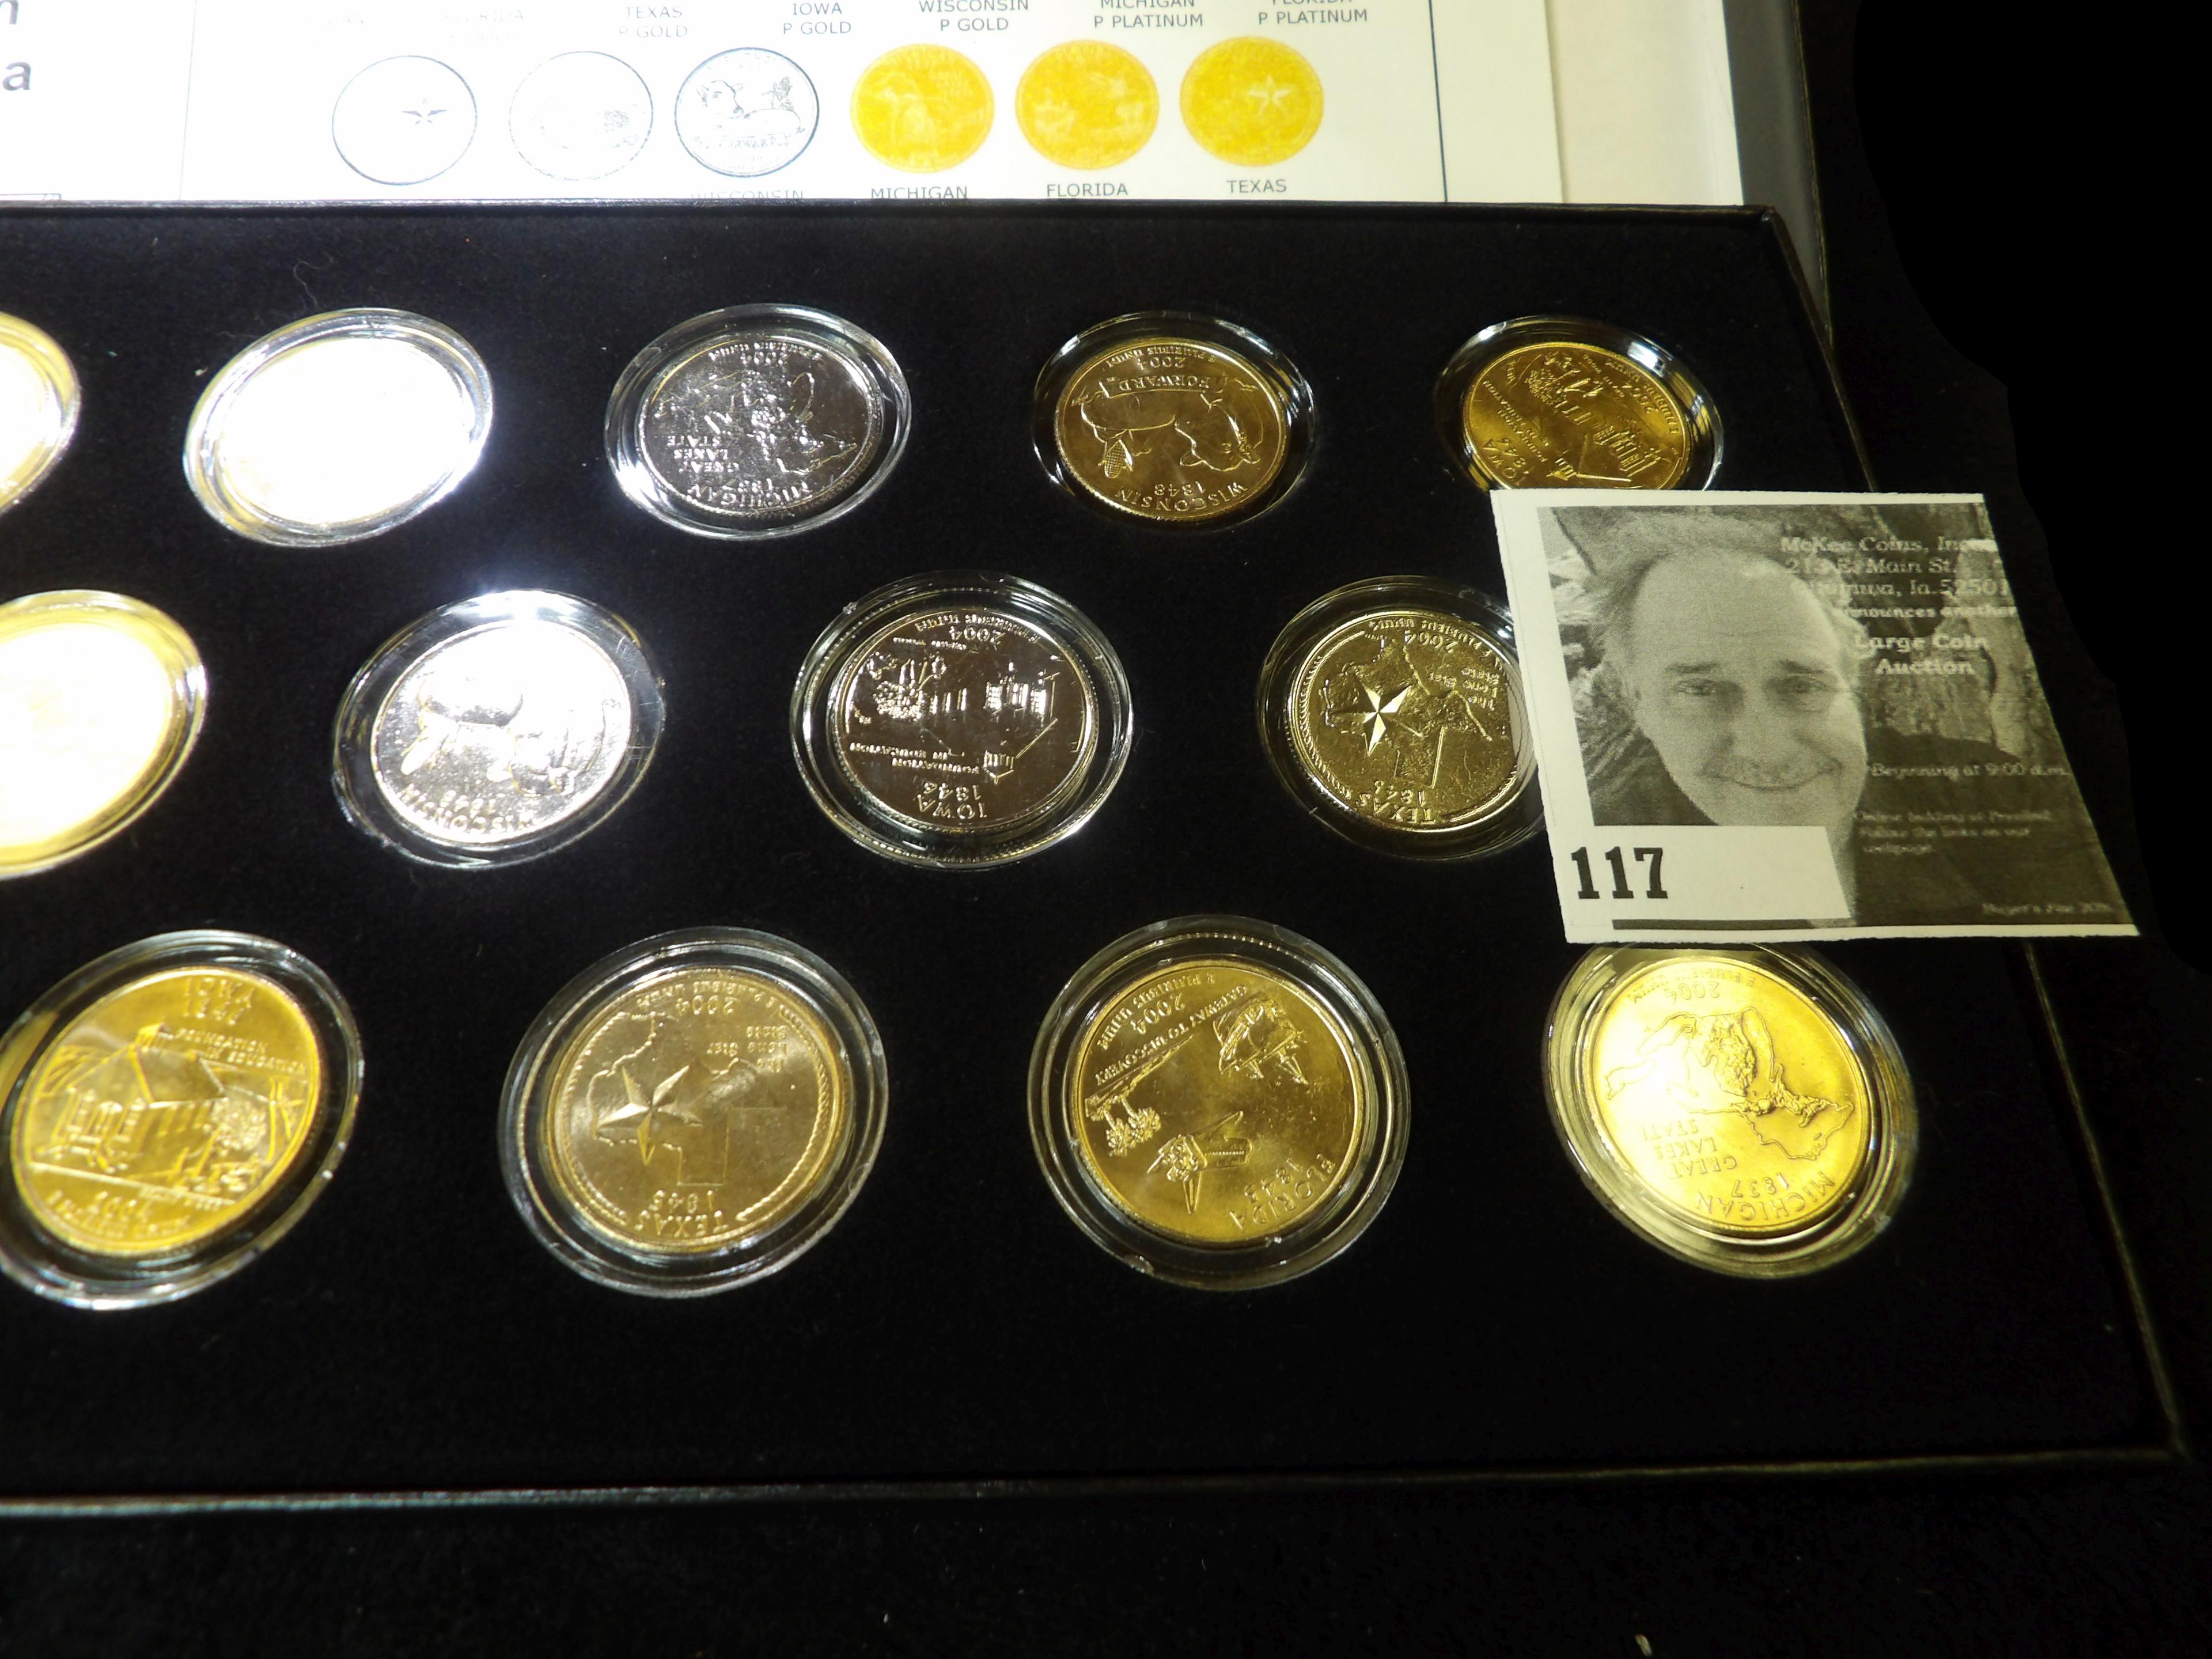 2004 P & D Precious Metal Quarters Collection (Gold/Platinum) as issued by the Collectors Alliance,